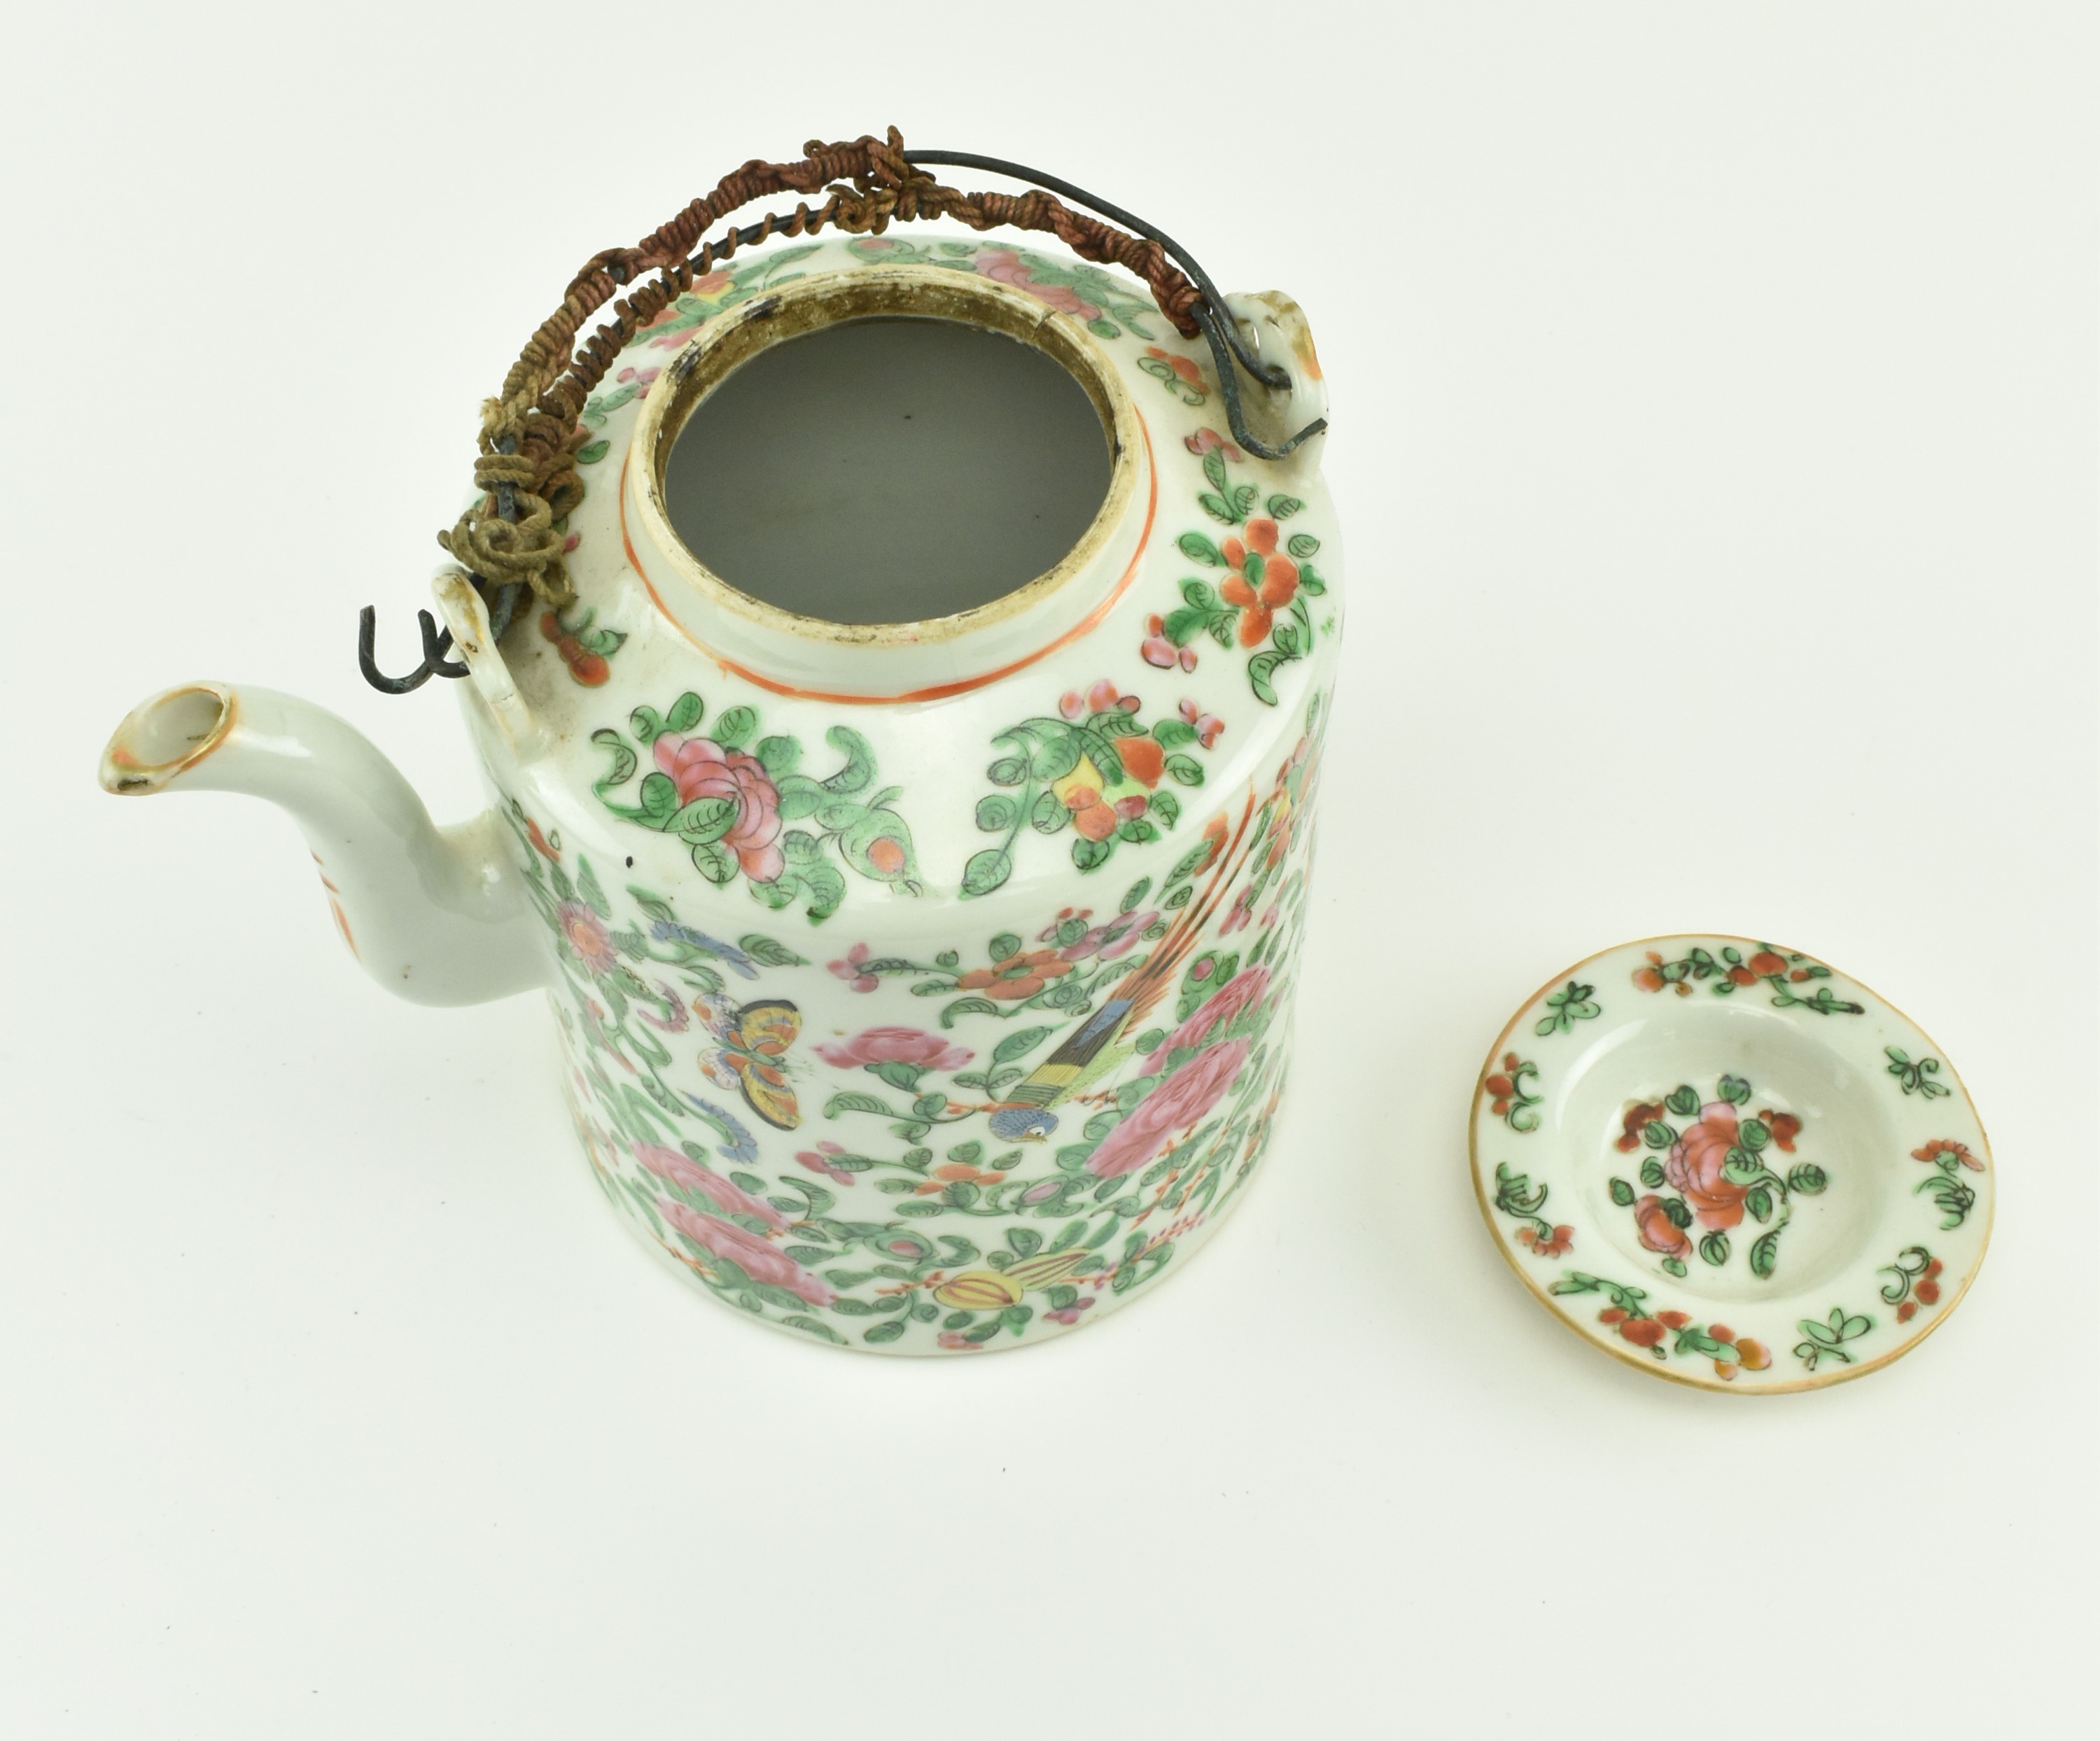 20TH CENTURY FAMILLE ROSE FLOWERS AND BIRDS HANDLED TEAPOT - Image 2 of 5